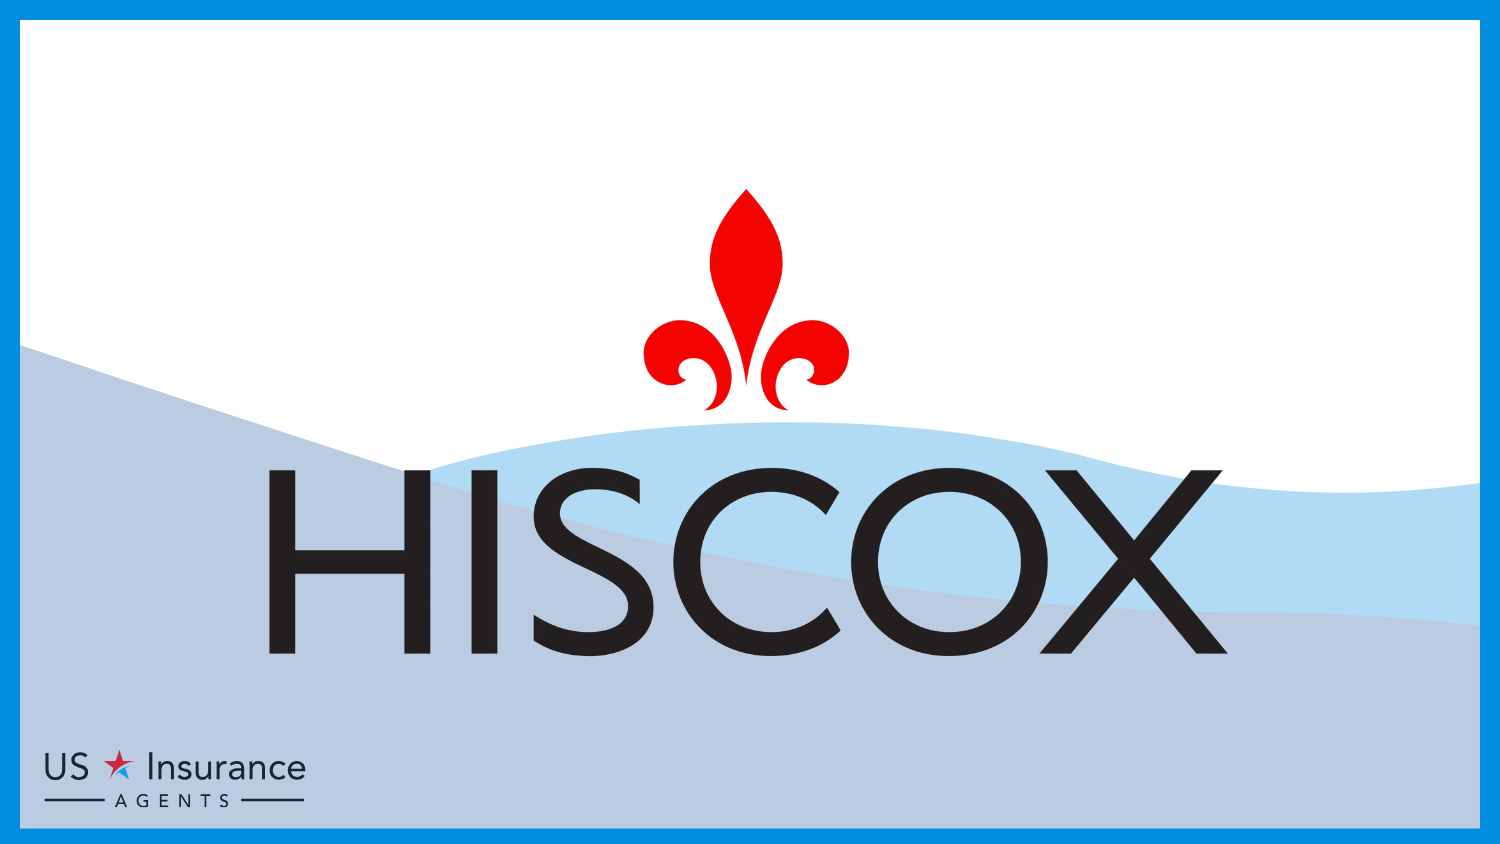 Hiscox: Best Business Insurance for Axe-Throwing Companies